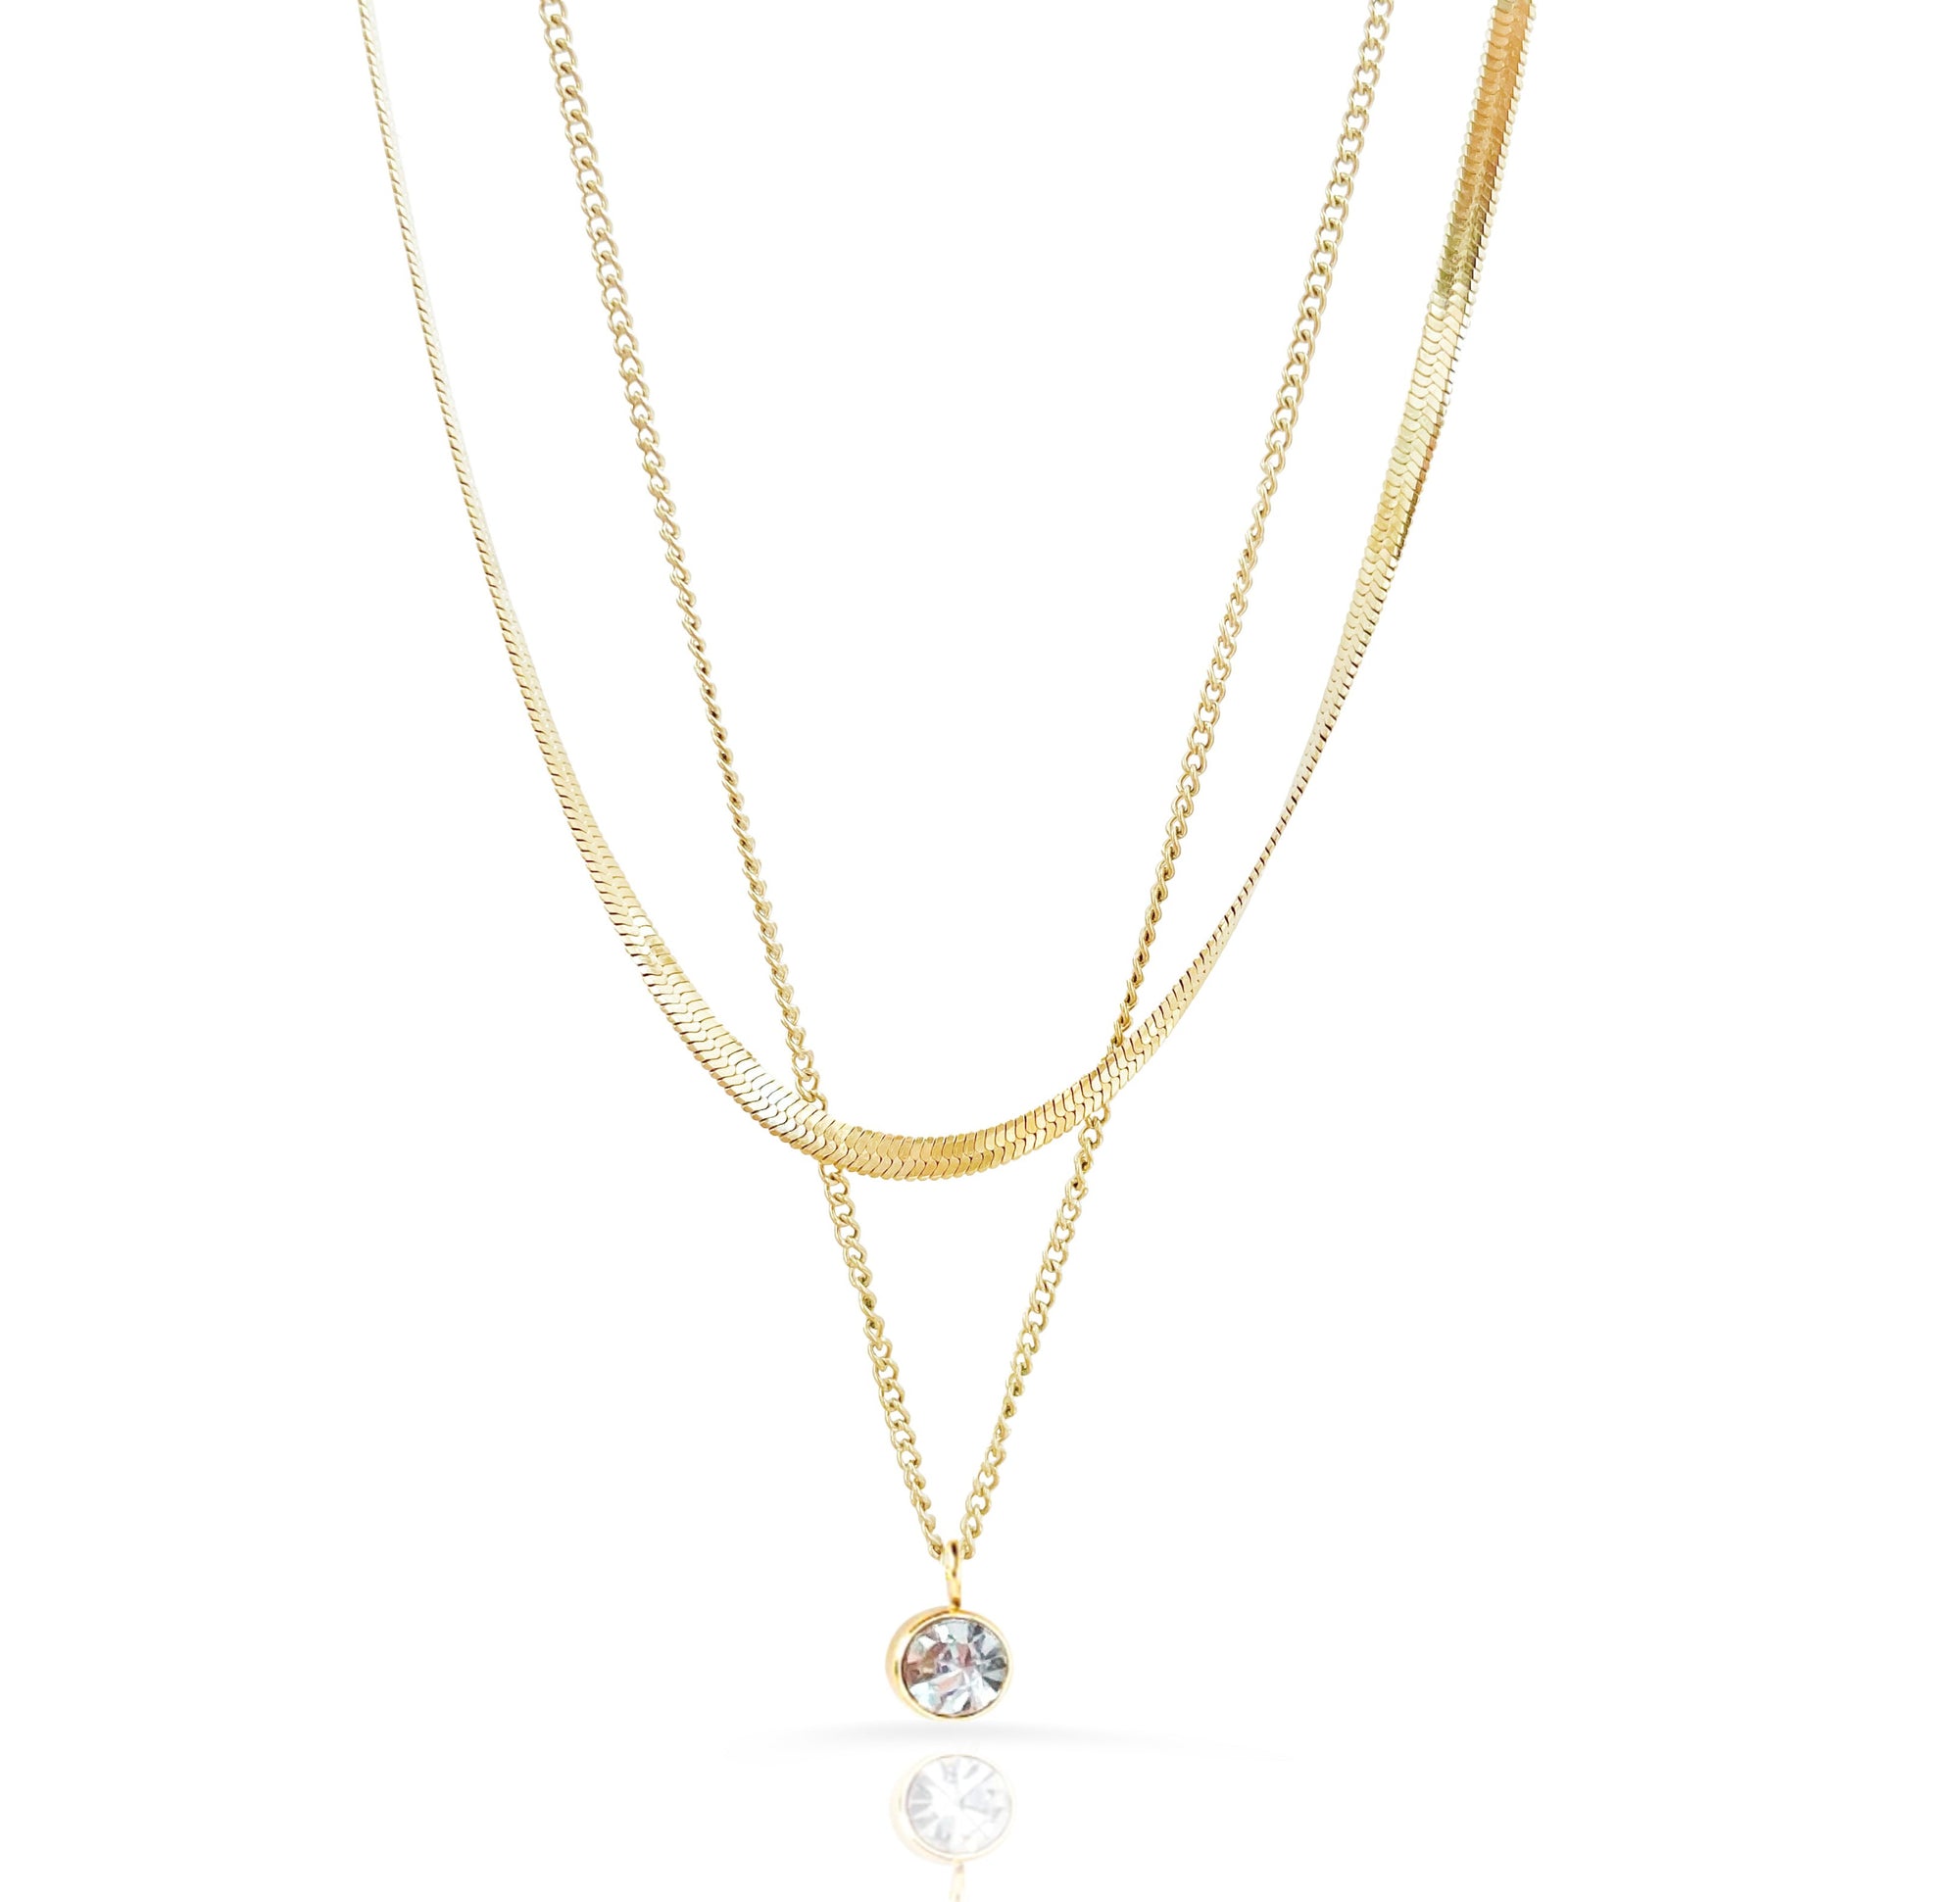 dainty solitaire stack chain necklace waterproof jewelry